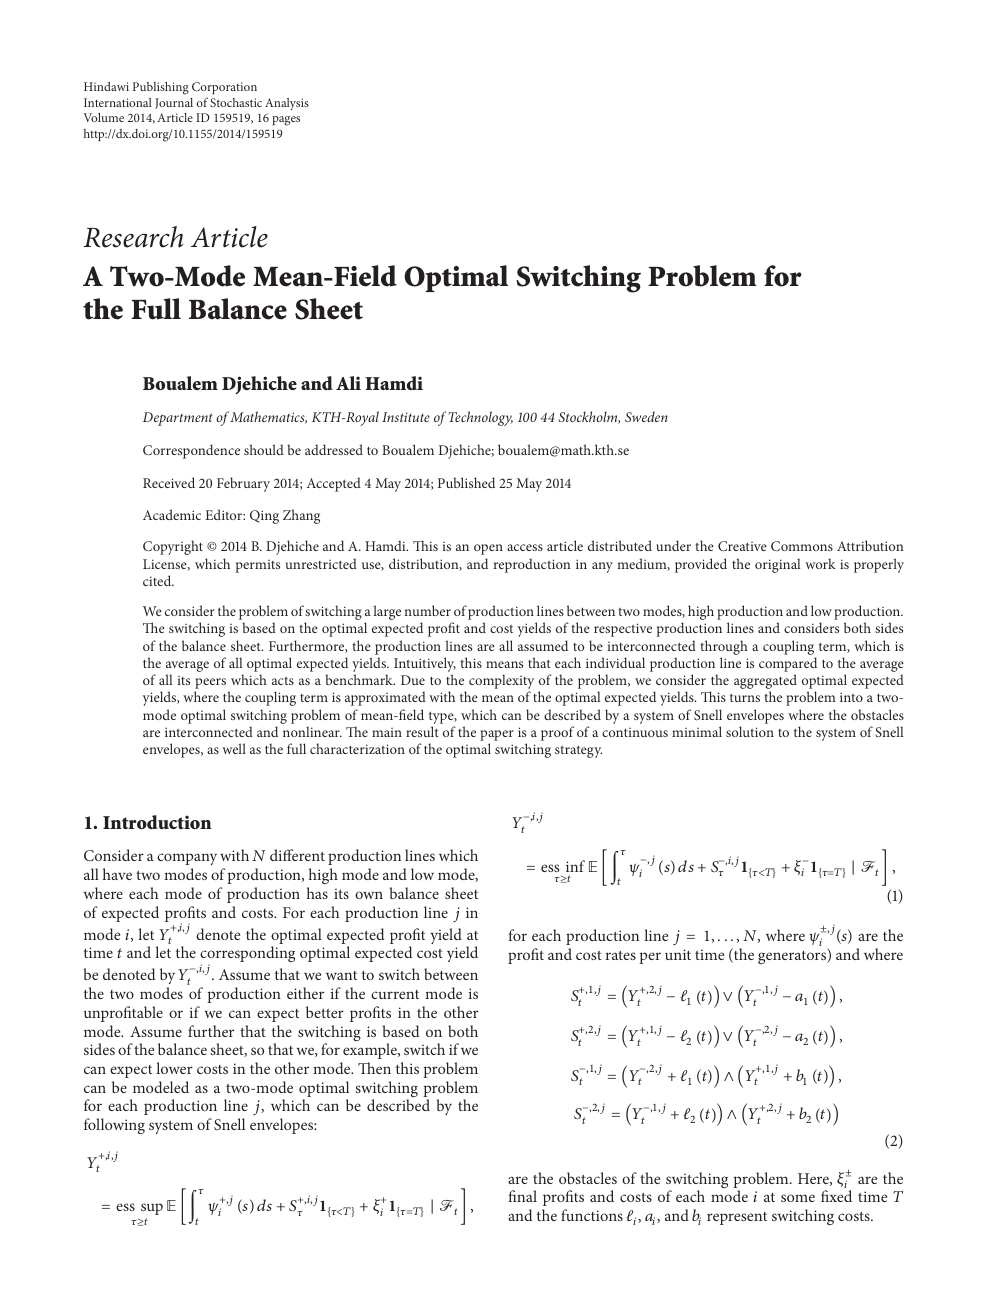 A Two Mode Mean Field Optimal Switching Problem For The Full Balance Sheet Topic Of Research Paper In Mathematics Download Scholarly Article Pdf And Read For Free On Cyberleninka Open Science Hub